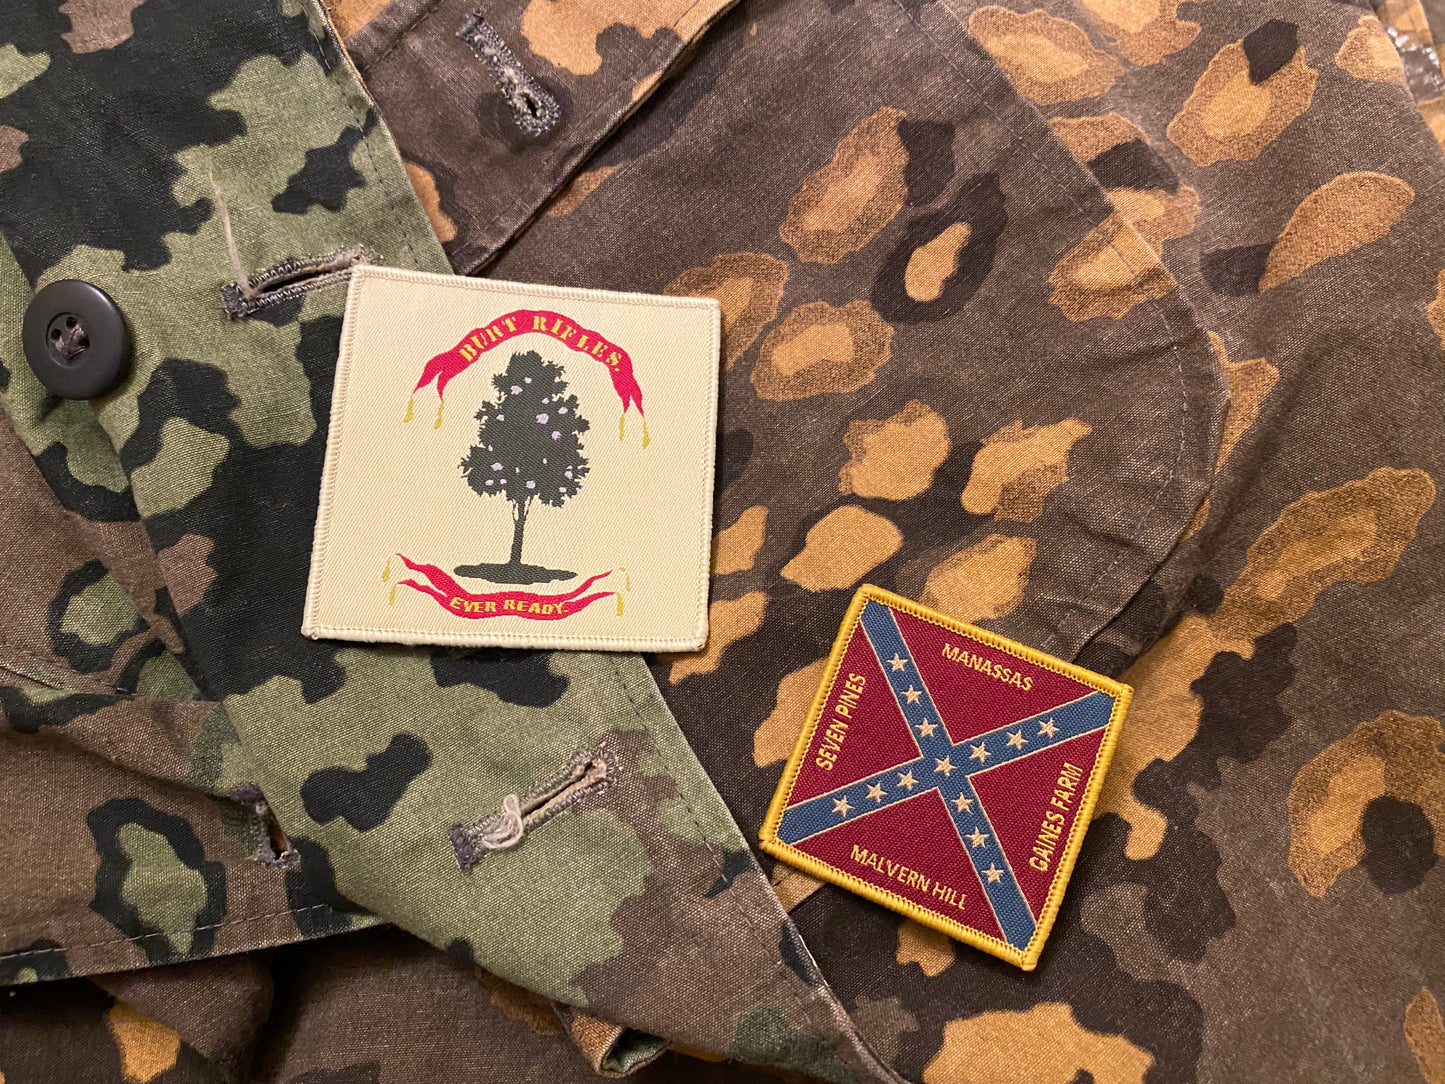 11th Mississippi Flag Morale Patch